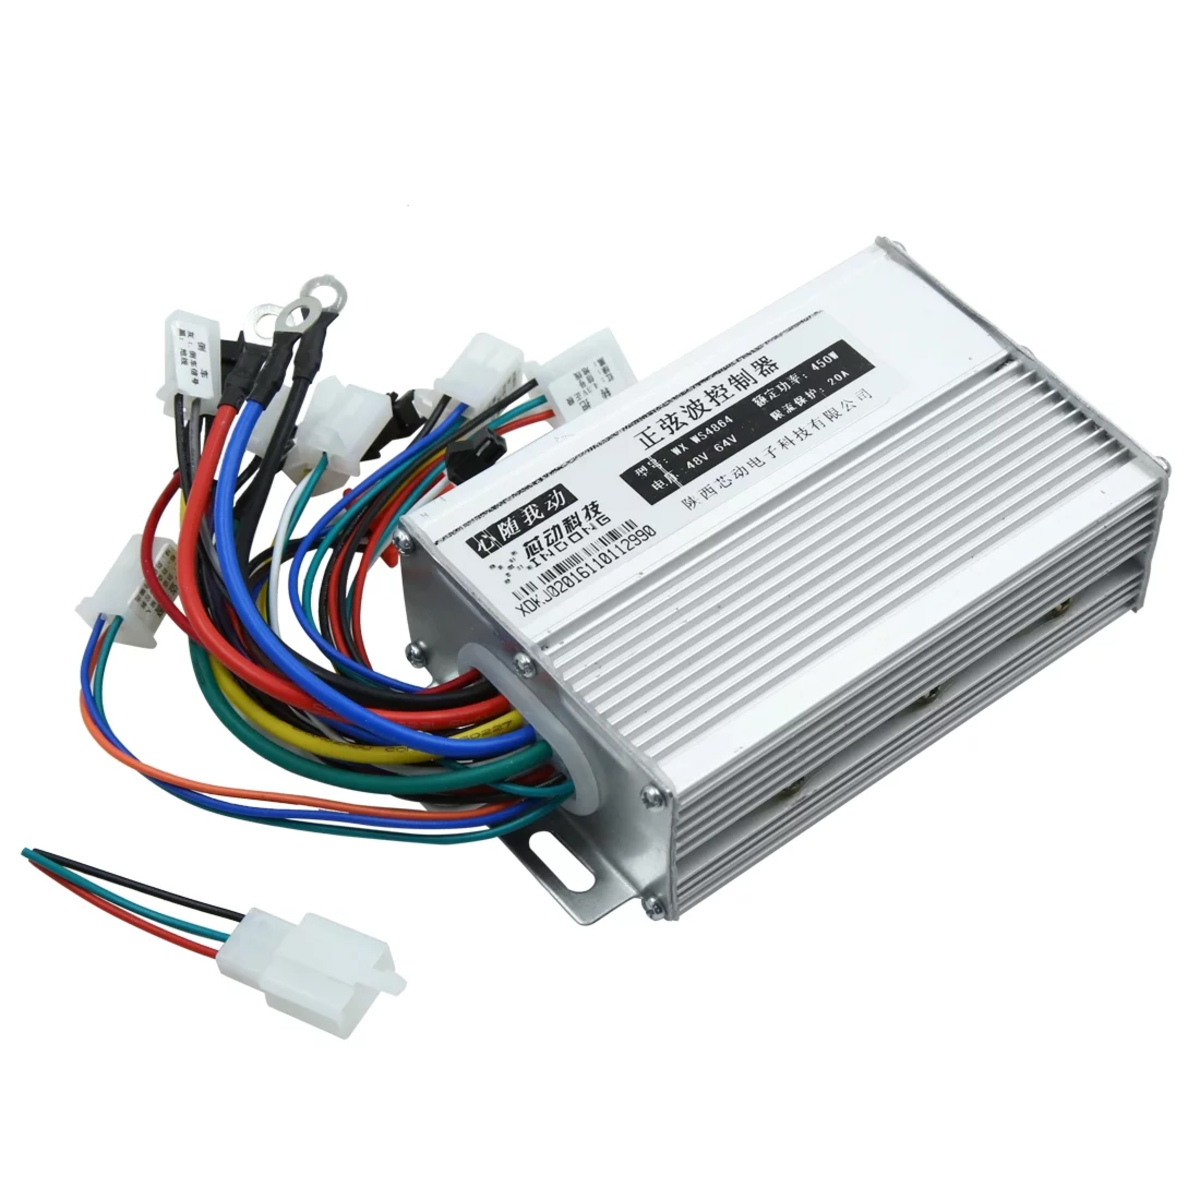 12V 60A DC from 220V AC for High Current DC Motor 1000W - Amazing idea 